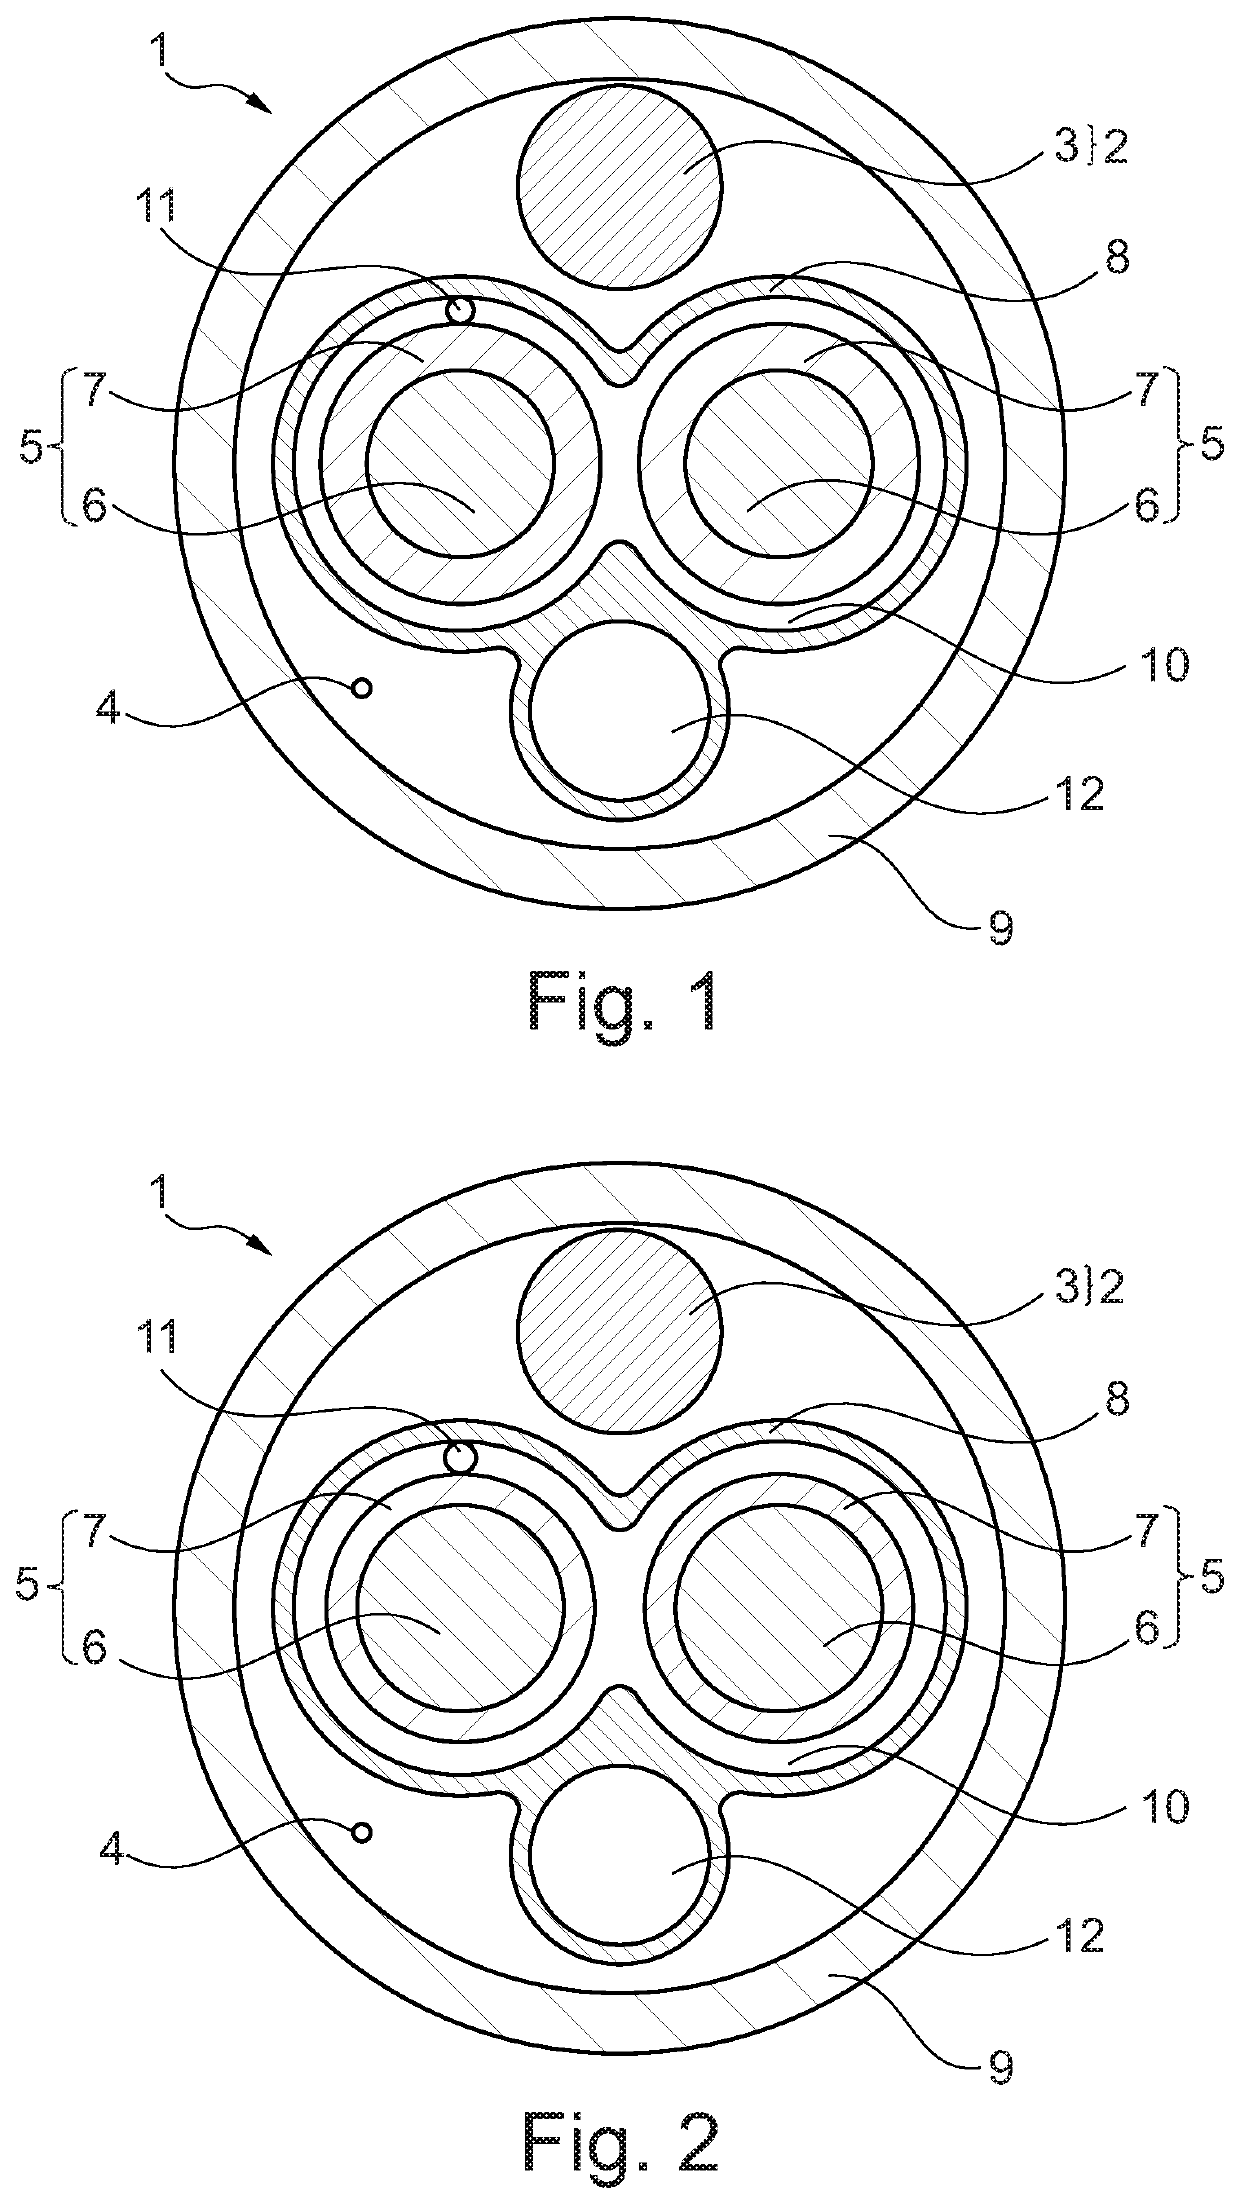 Heavy-current charging cable for charging an electric vehicle